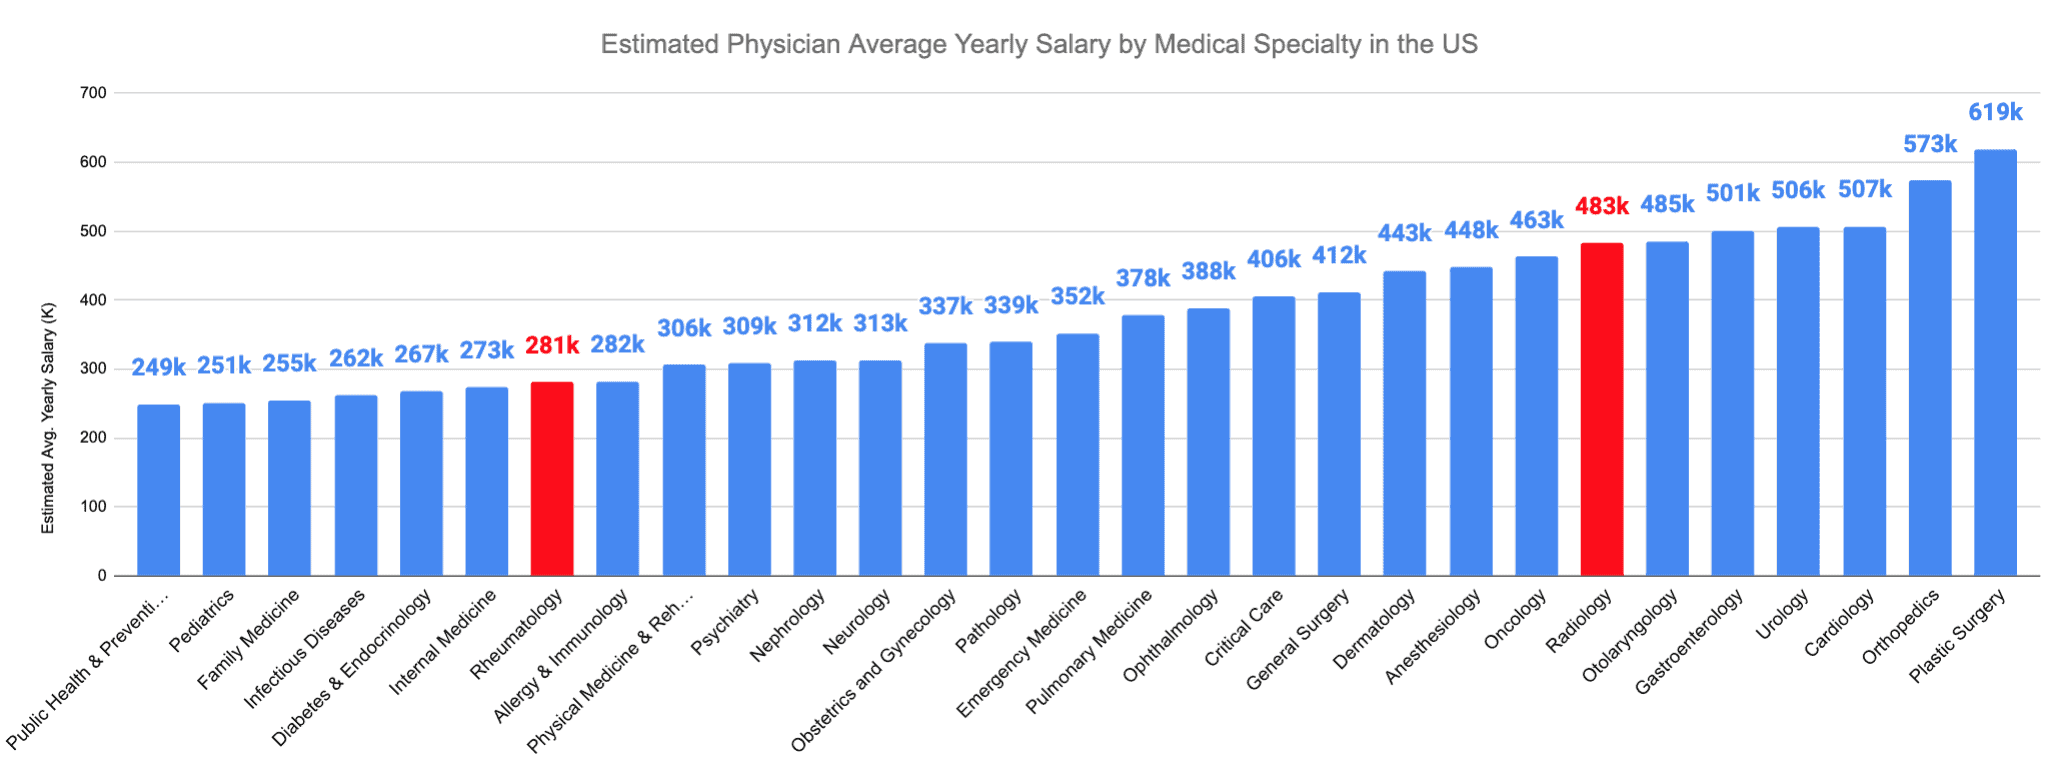 Radiology vs. Rheumatology Estimated Physician Average Yearly Salary by Medical Specialty in the US